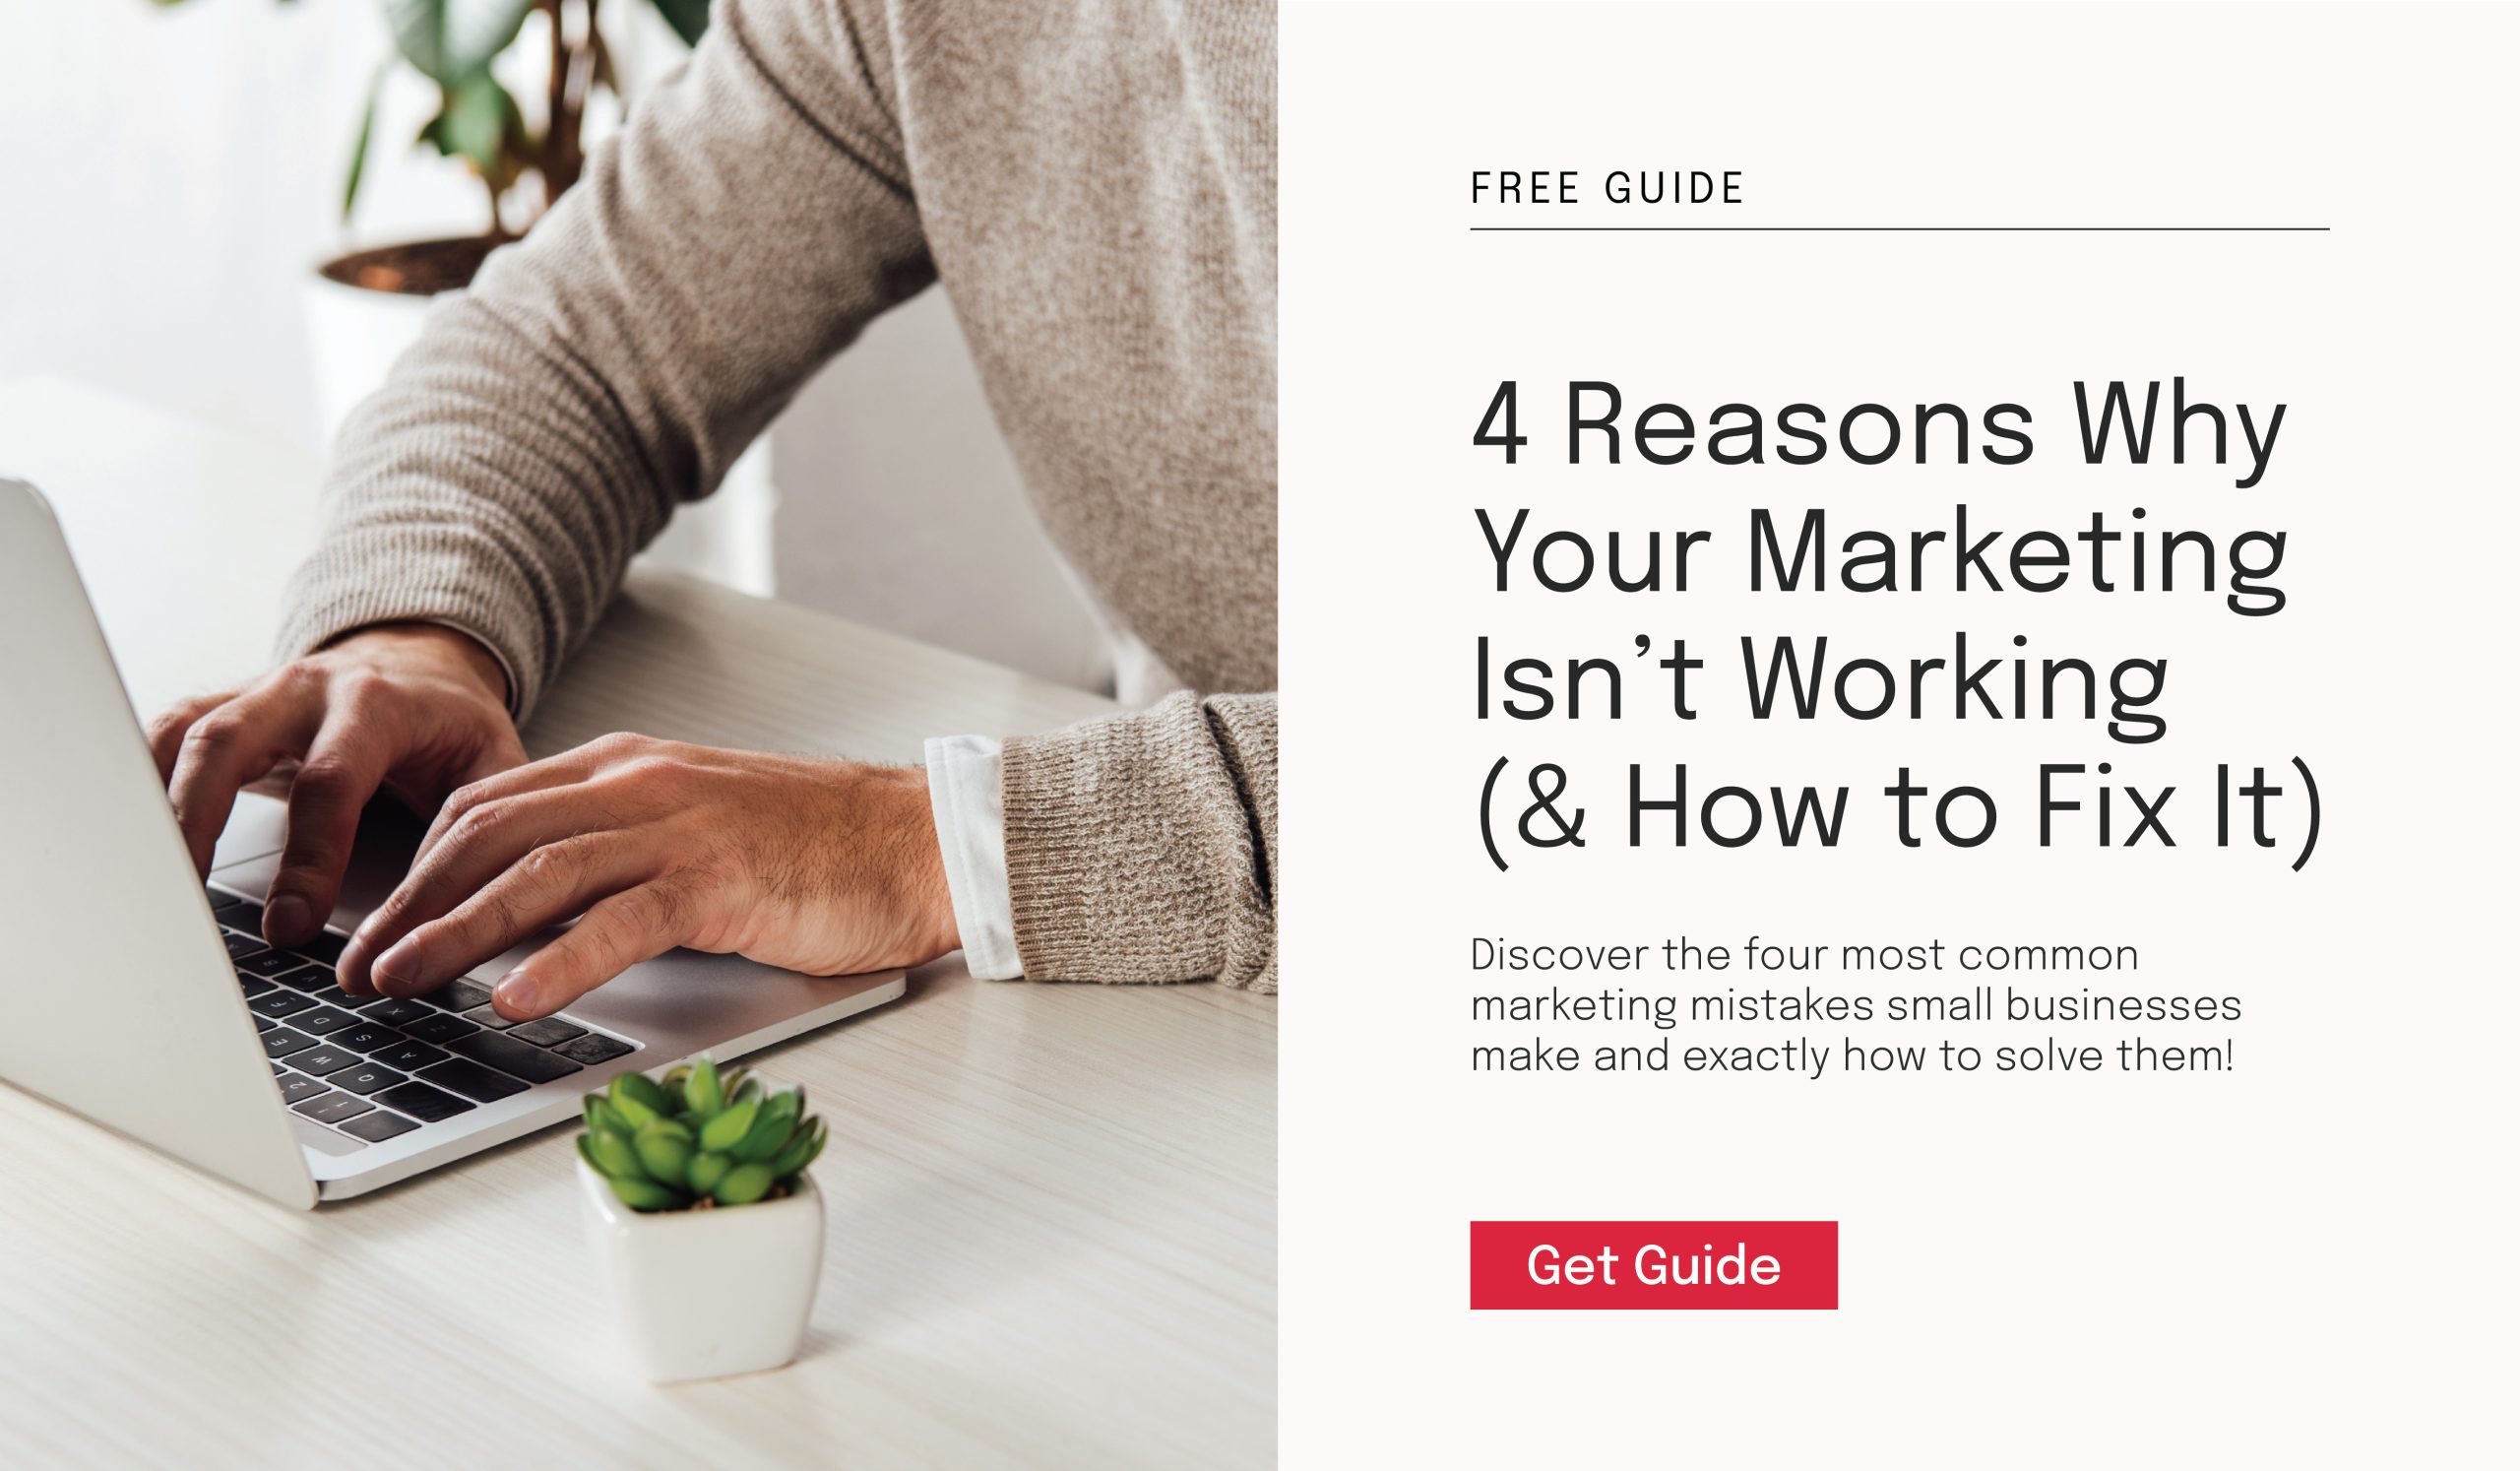 Discover the four most common marketing mistakes small businesses make and exactly how to solve them! Download our guide.